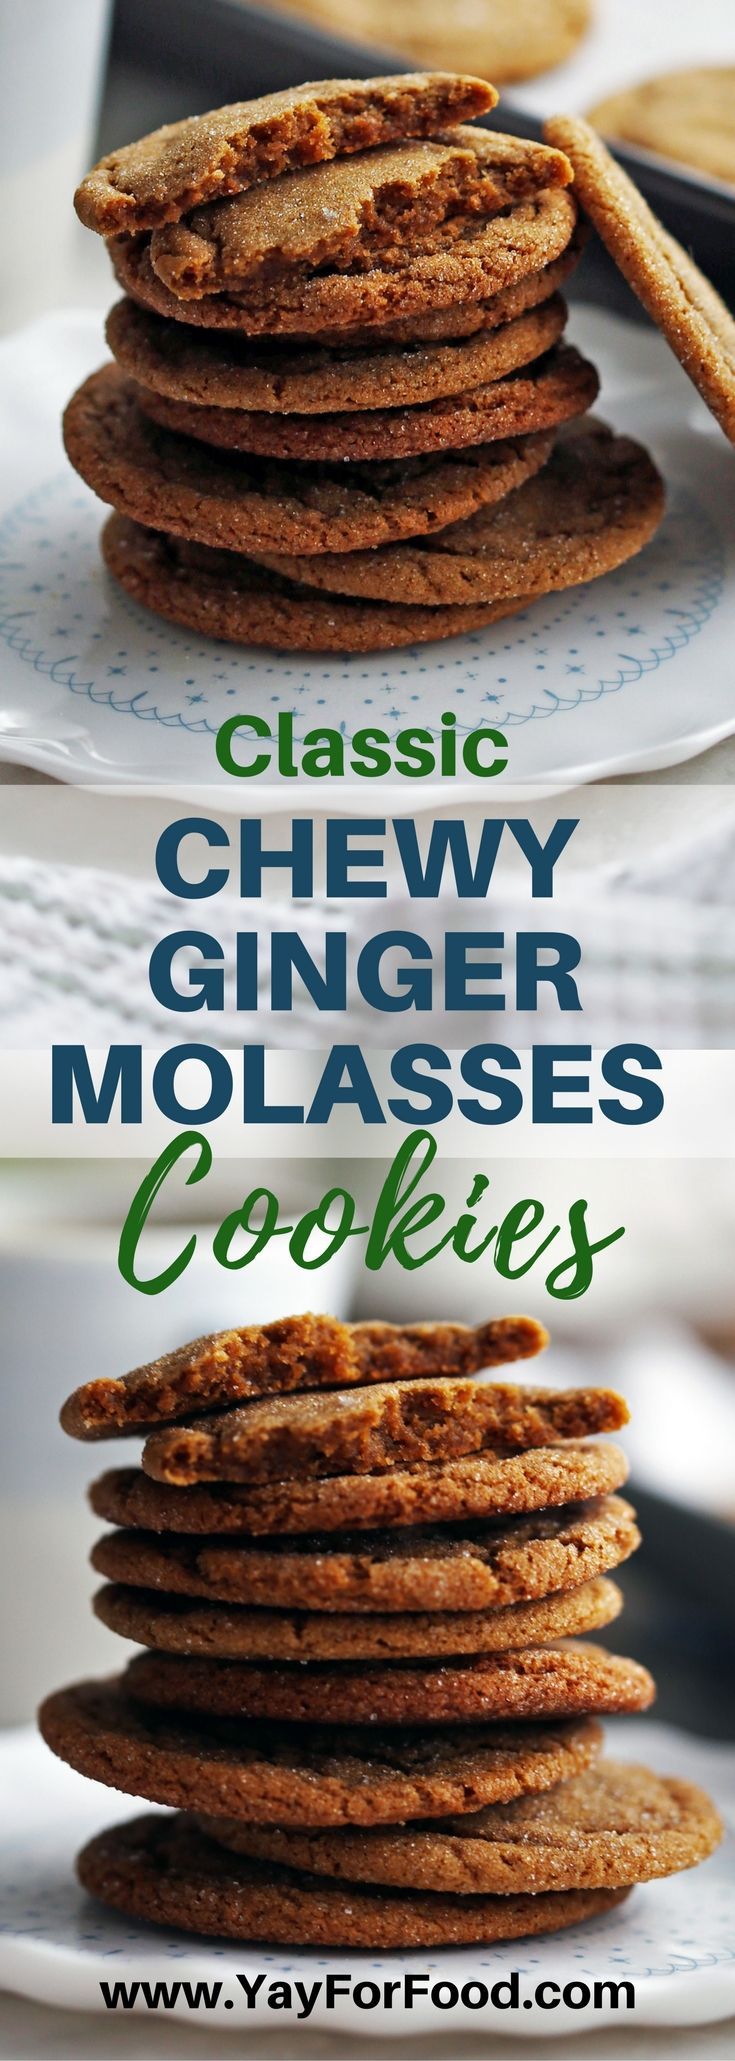 Check out these delicious sweet and spiced gingersnap (ginger molasses) cookies! Makes 32 tasty classic cookies in under 30